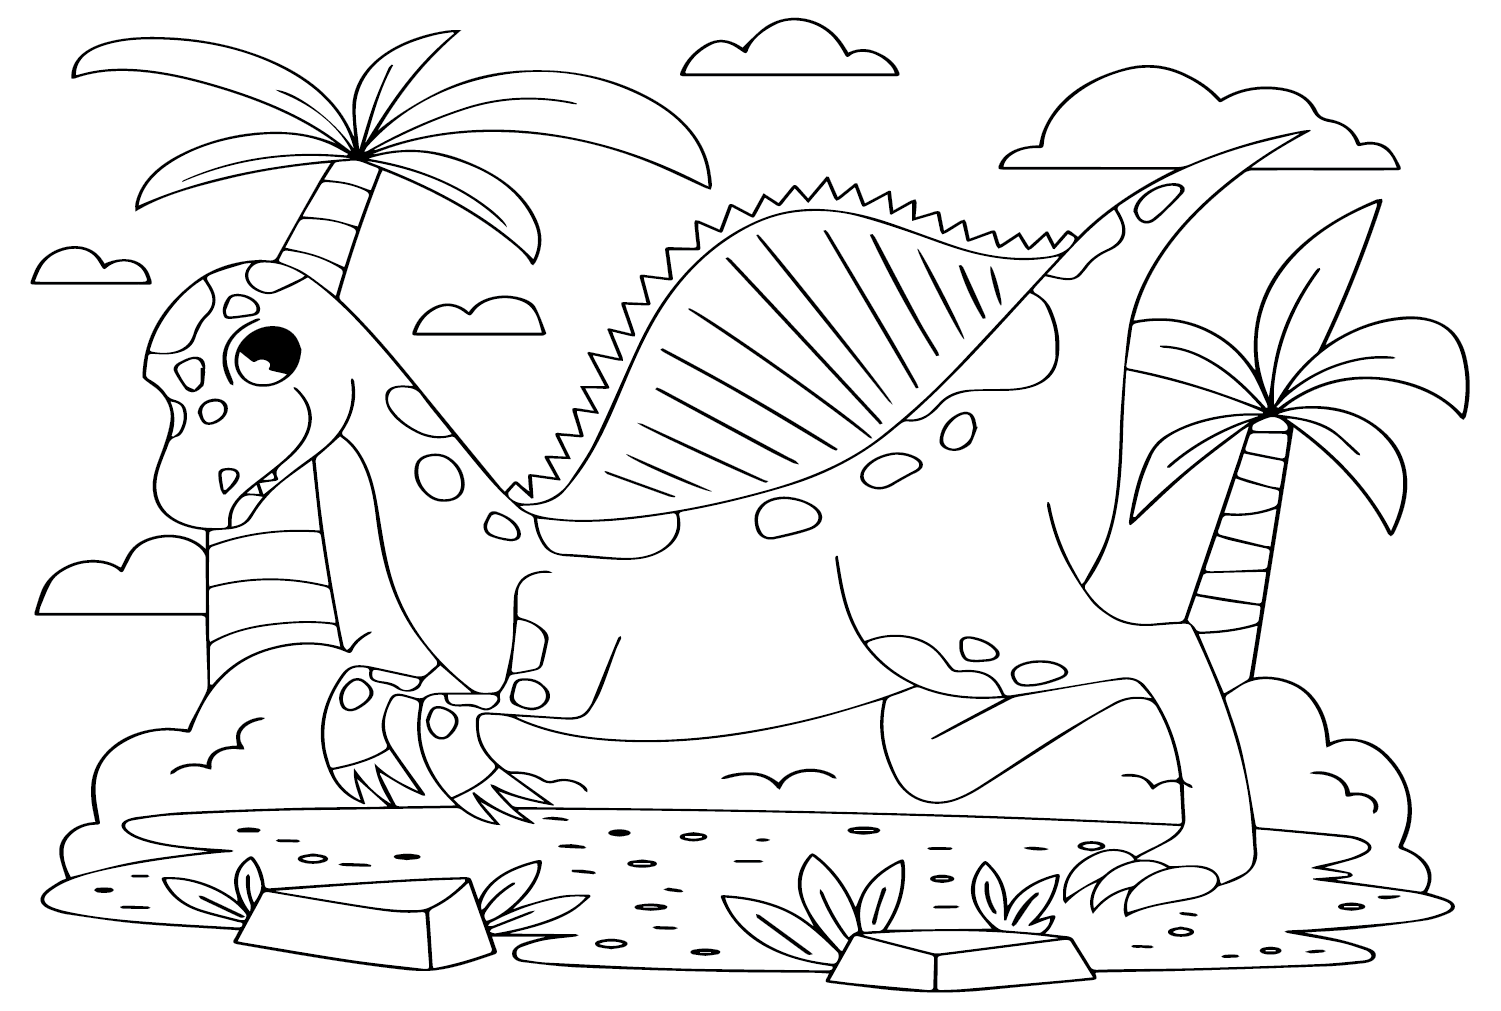 Pictures Spinosaurus Aegyptiacus to Color from Spinosaurus Aegyptiacus